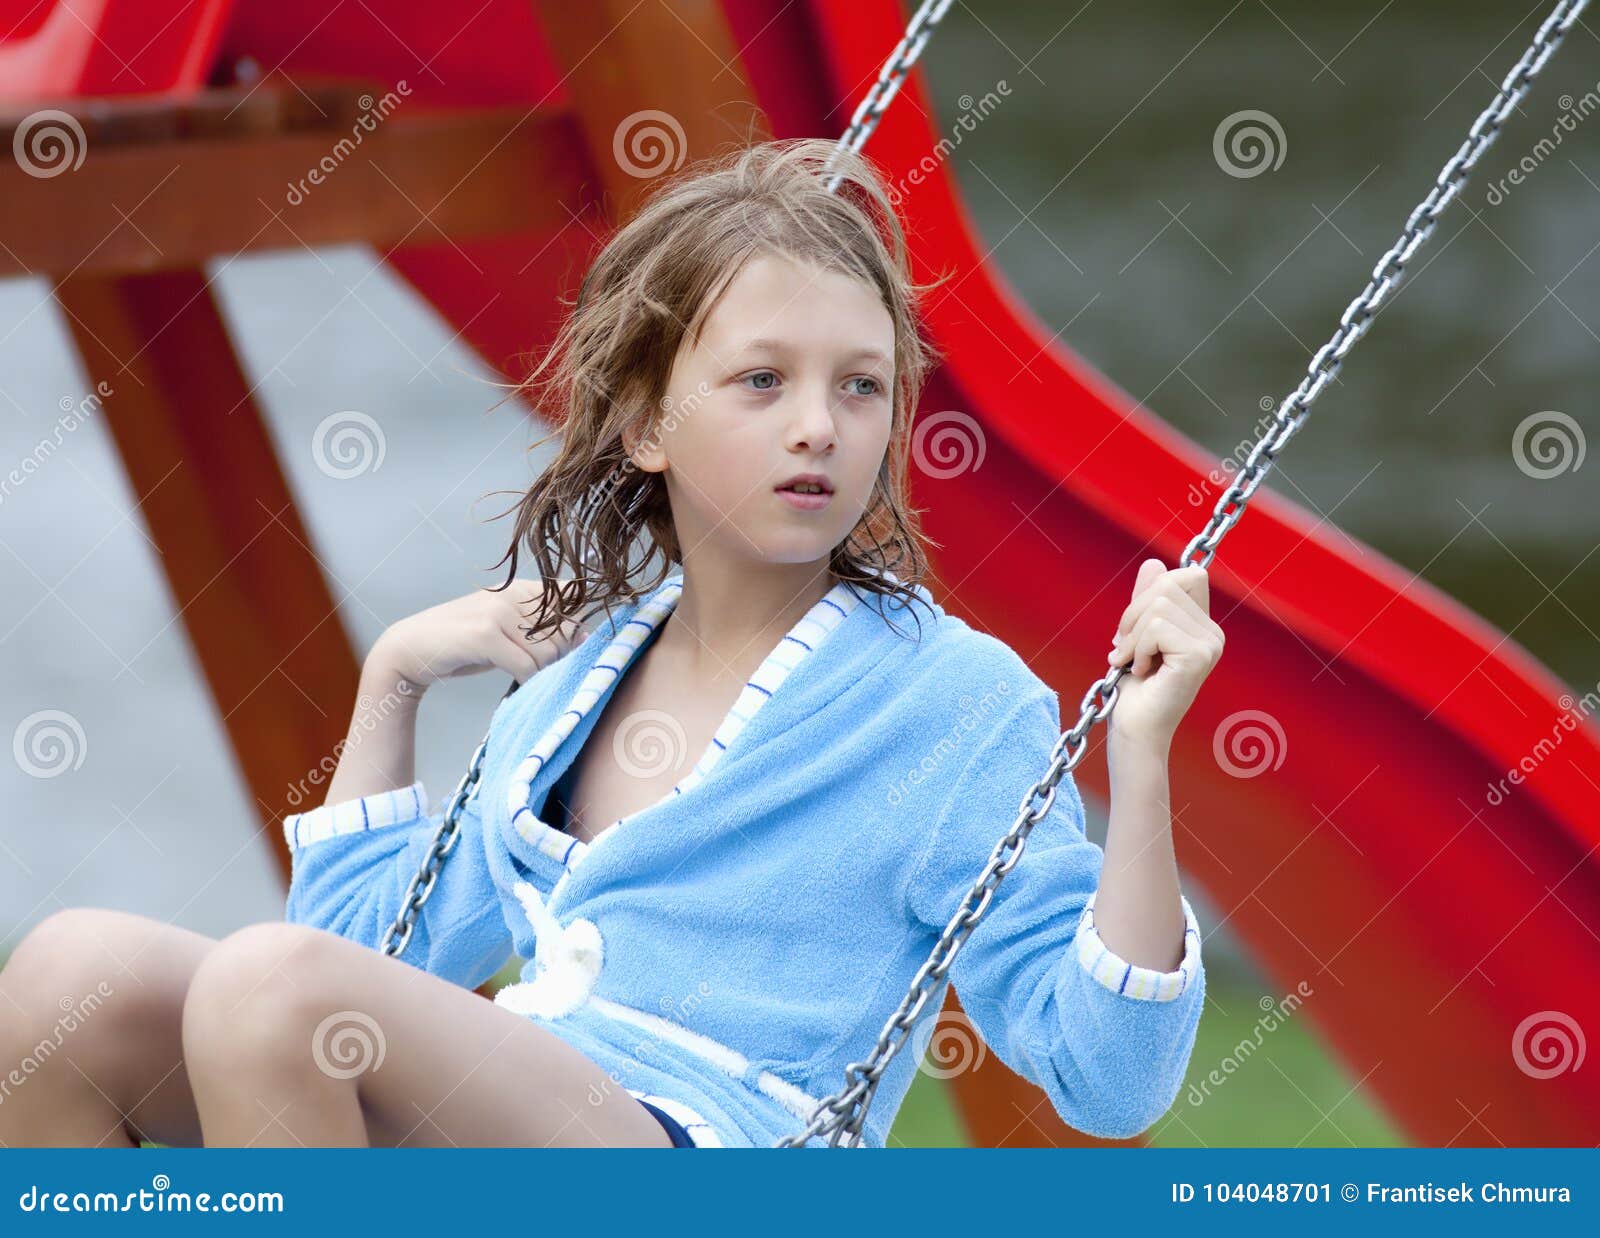 Portrait of a Boy with Blond Hair on a Swing Stock Image - Image of ...